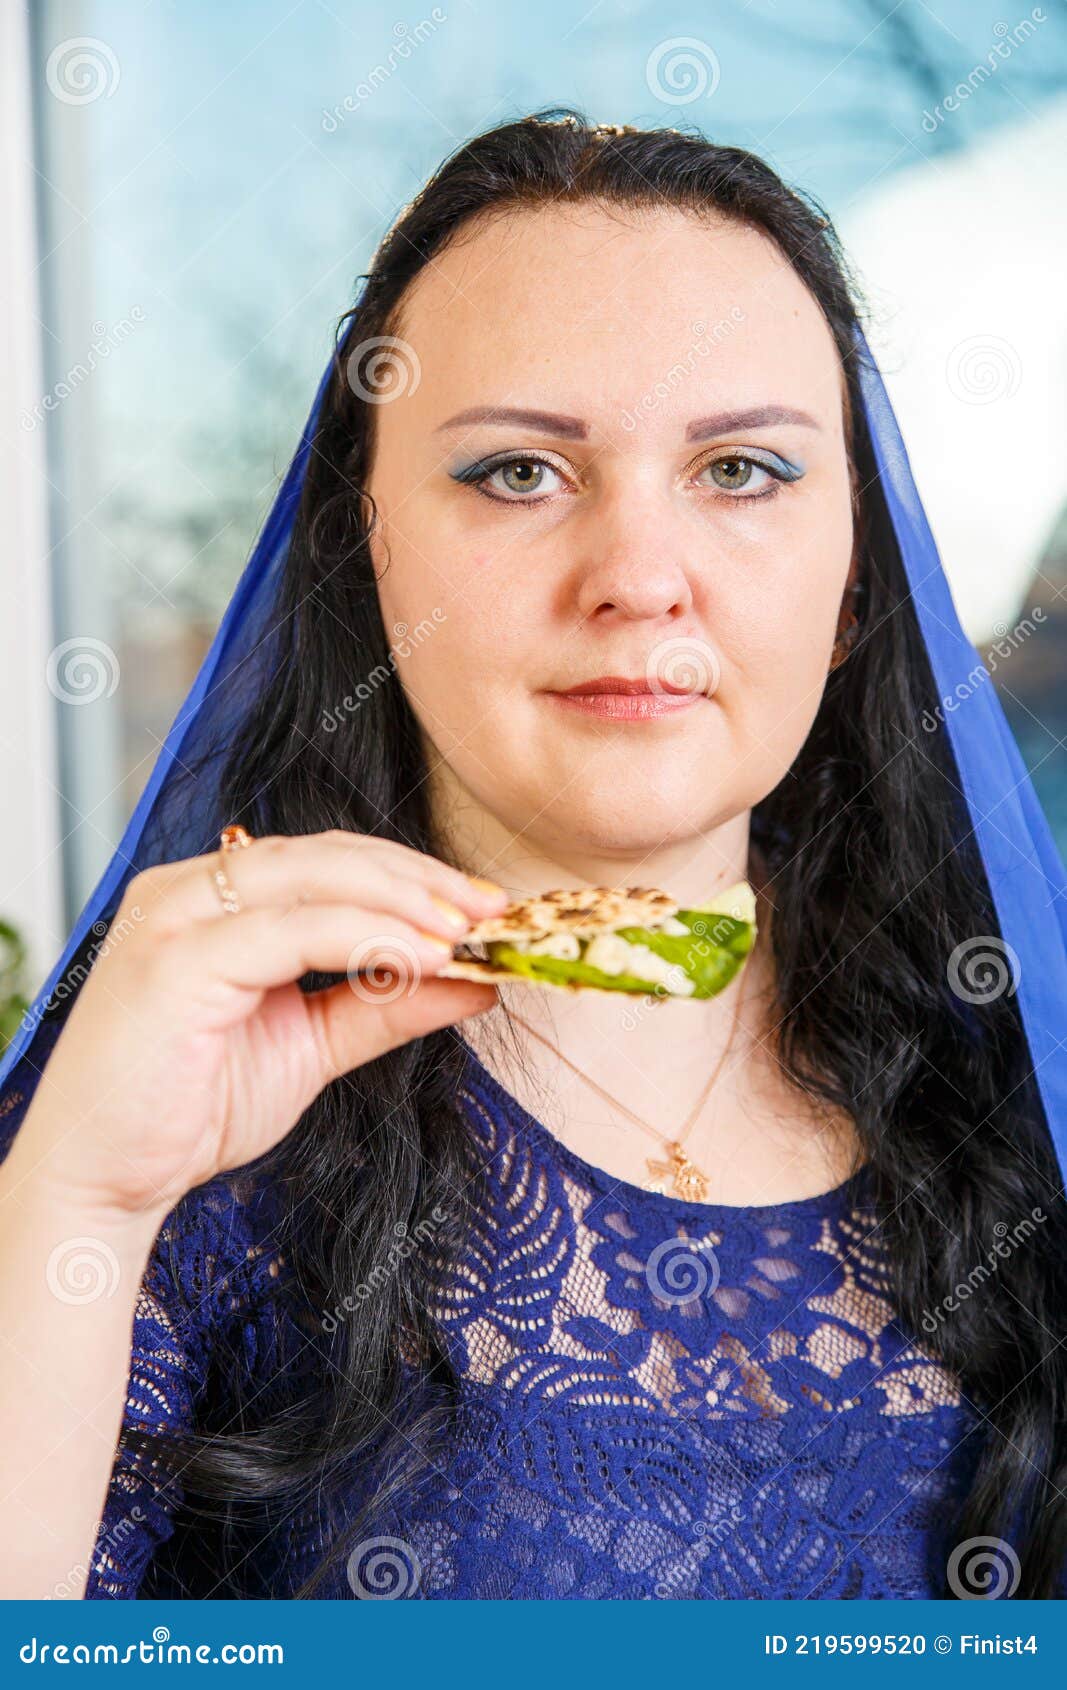 a jewish woman with her head covered in a blue cape at the passover seder table is eating moror hazeret matzah.